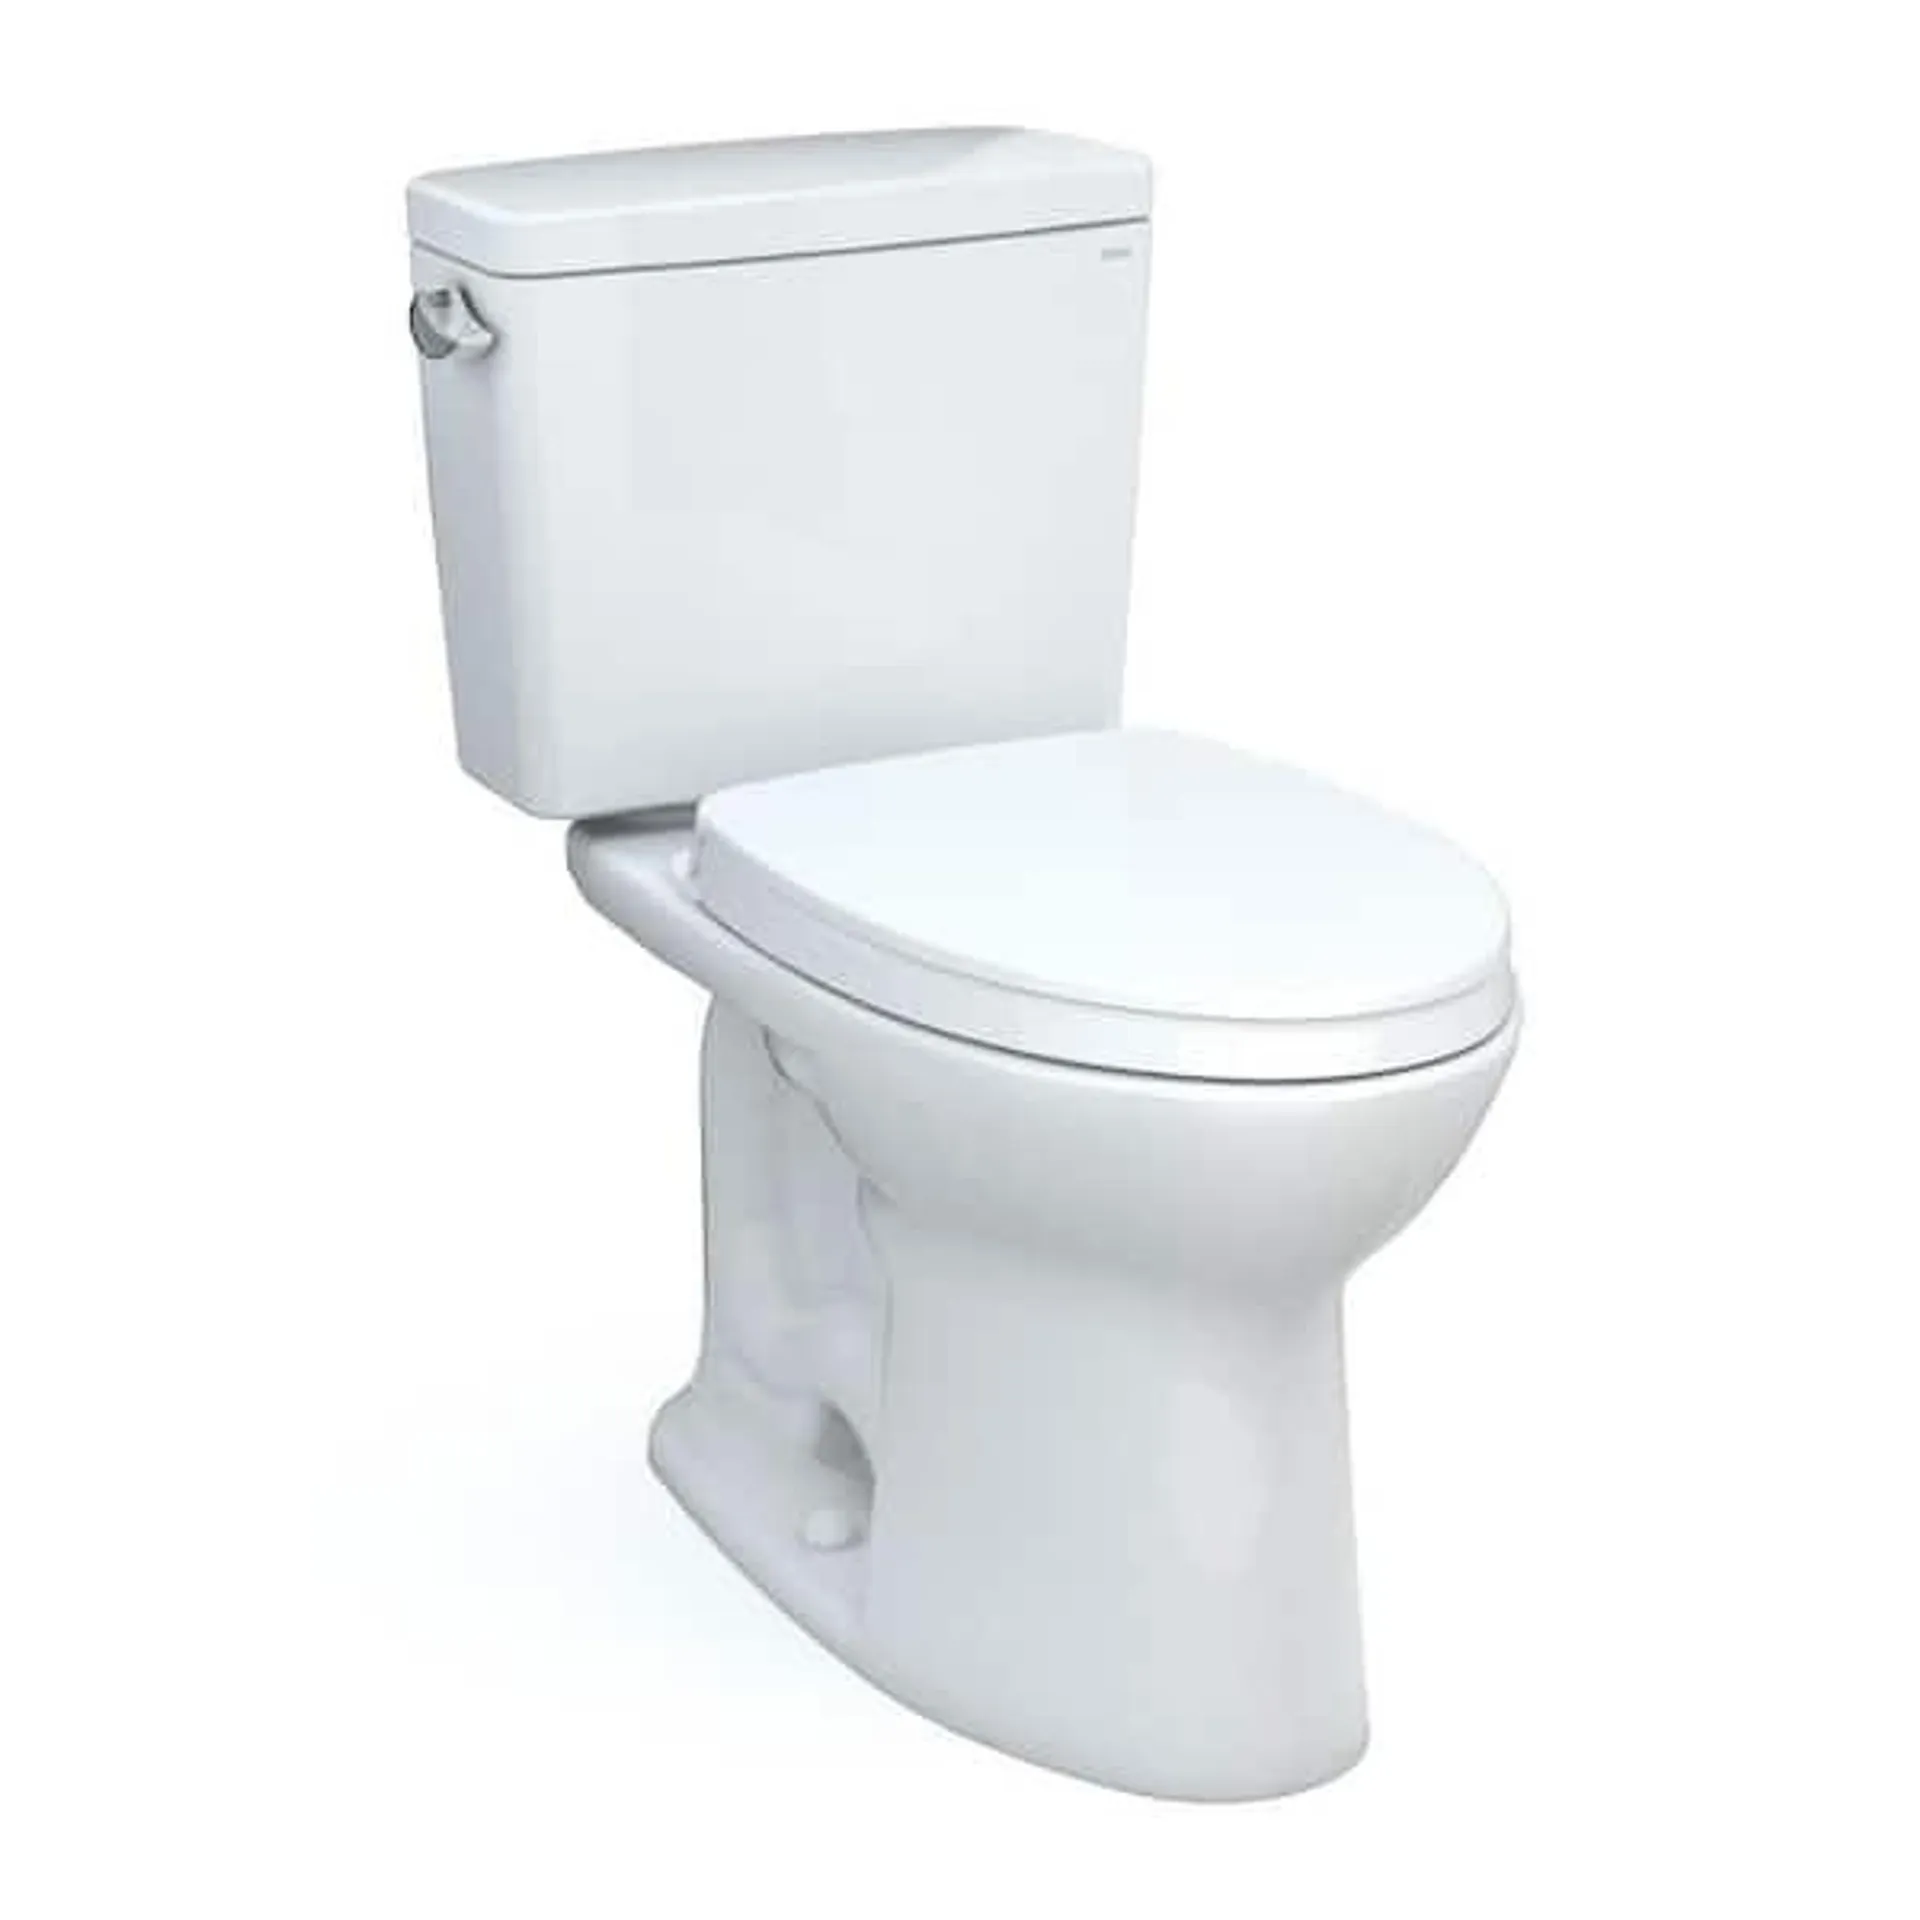 Drake 12 in. Rough In Two-Piece 1.6 GPF Single Flush Elongated Toilet in Cotton White, SoftClose Seat Included